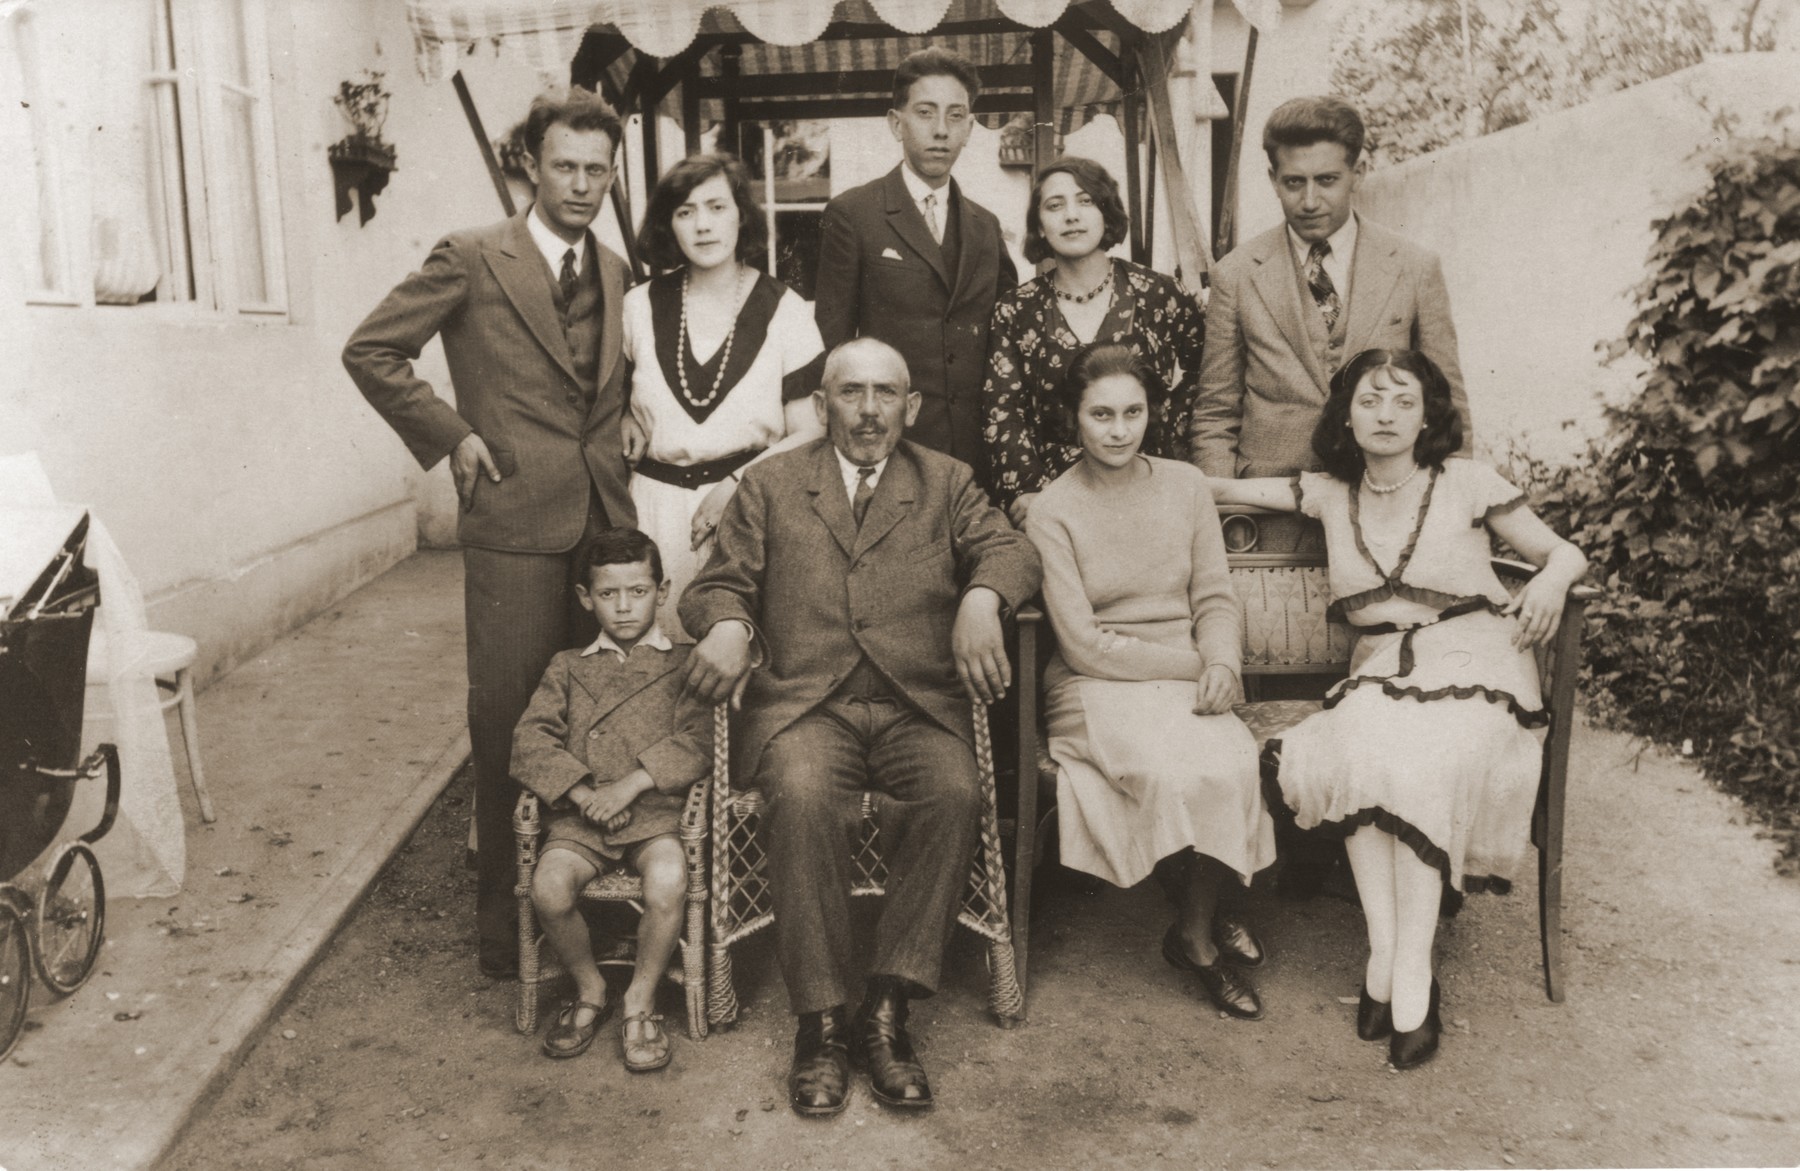 Portrait of the Vermes and Beck families taken outside Aladar Vermes' photo studio in Topolcany, Slovakia.

Pictured in the front row from left to right are: Robert Vermes, Adolf Beck, Manci Vermes and an unidentified cousin.  In the back row are: Aladar Vermes, Helena (Beck) Vermes, Pista Beck, Manci Beck and Ernest Beck.  Erika Vermes is in the baby carriage at the left.  Only Erika, Helena and Ernest survived the war.